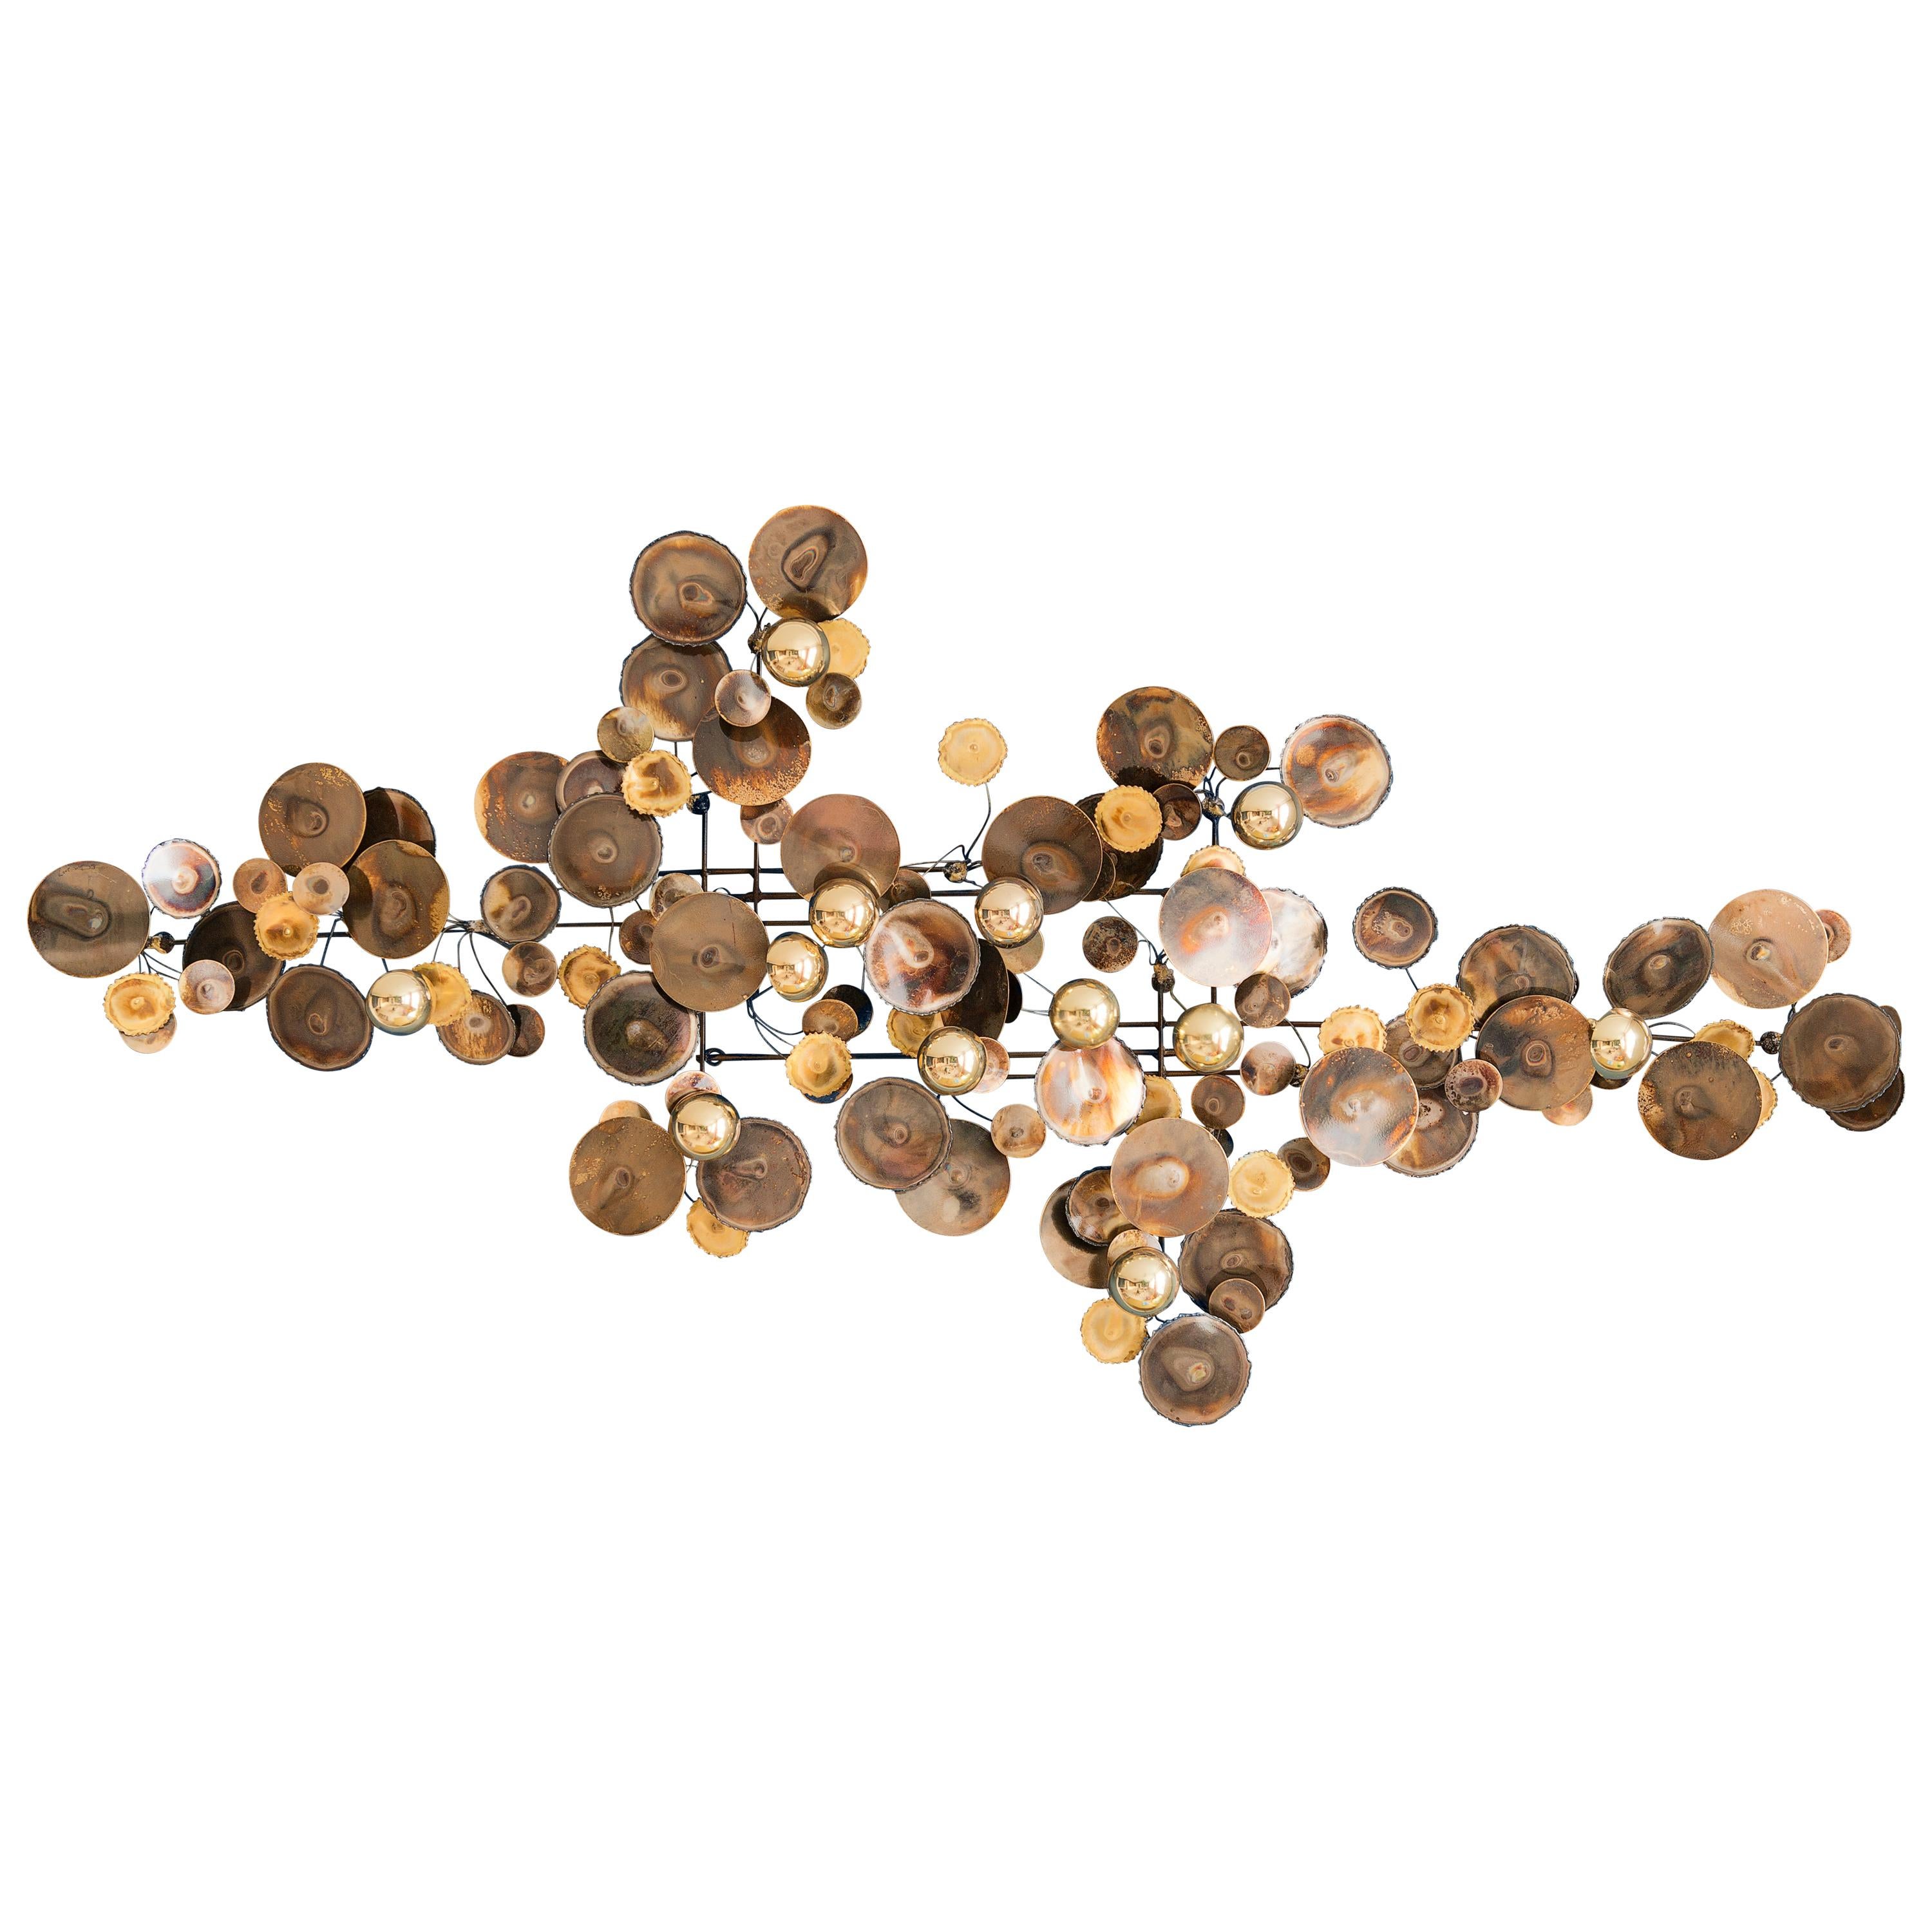 Contemporary Re-Edition Curtis Jere Raindrops Wall Sculpture in Brass